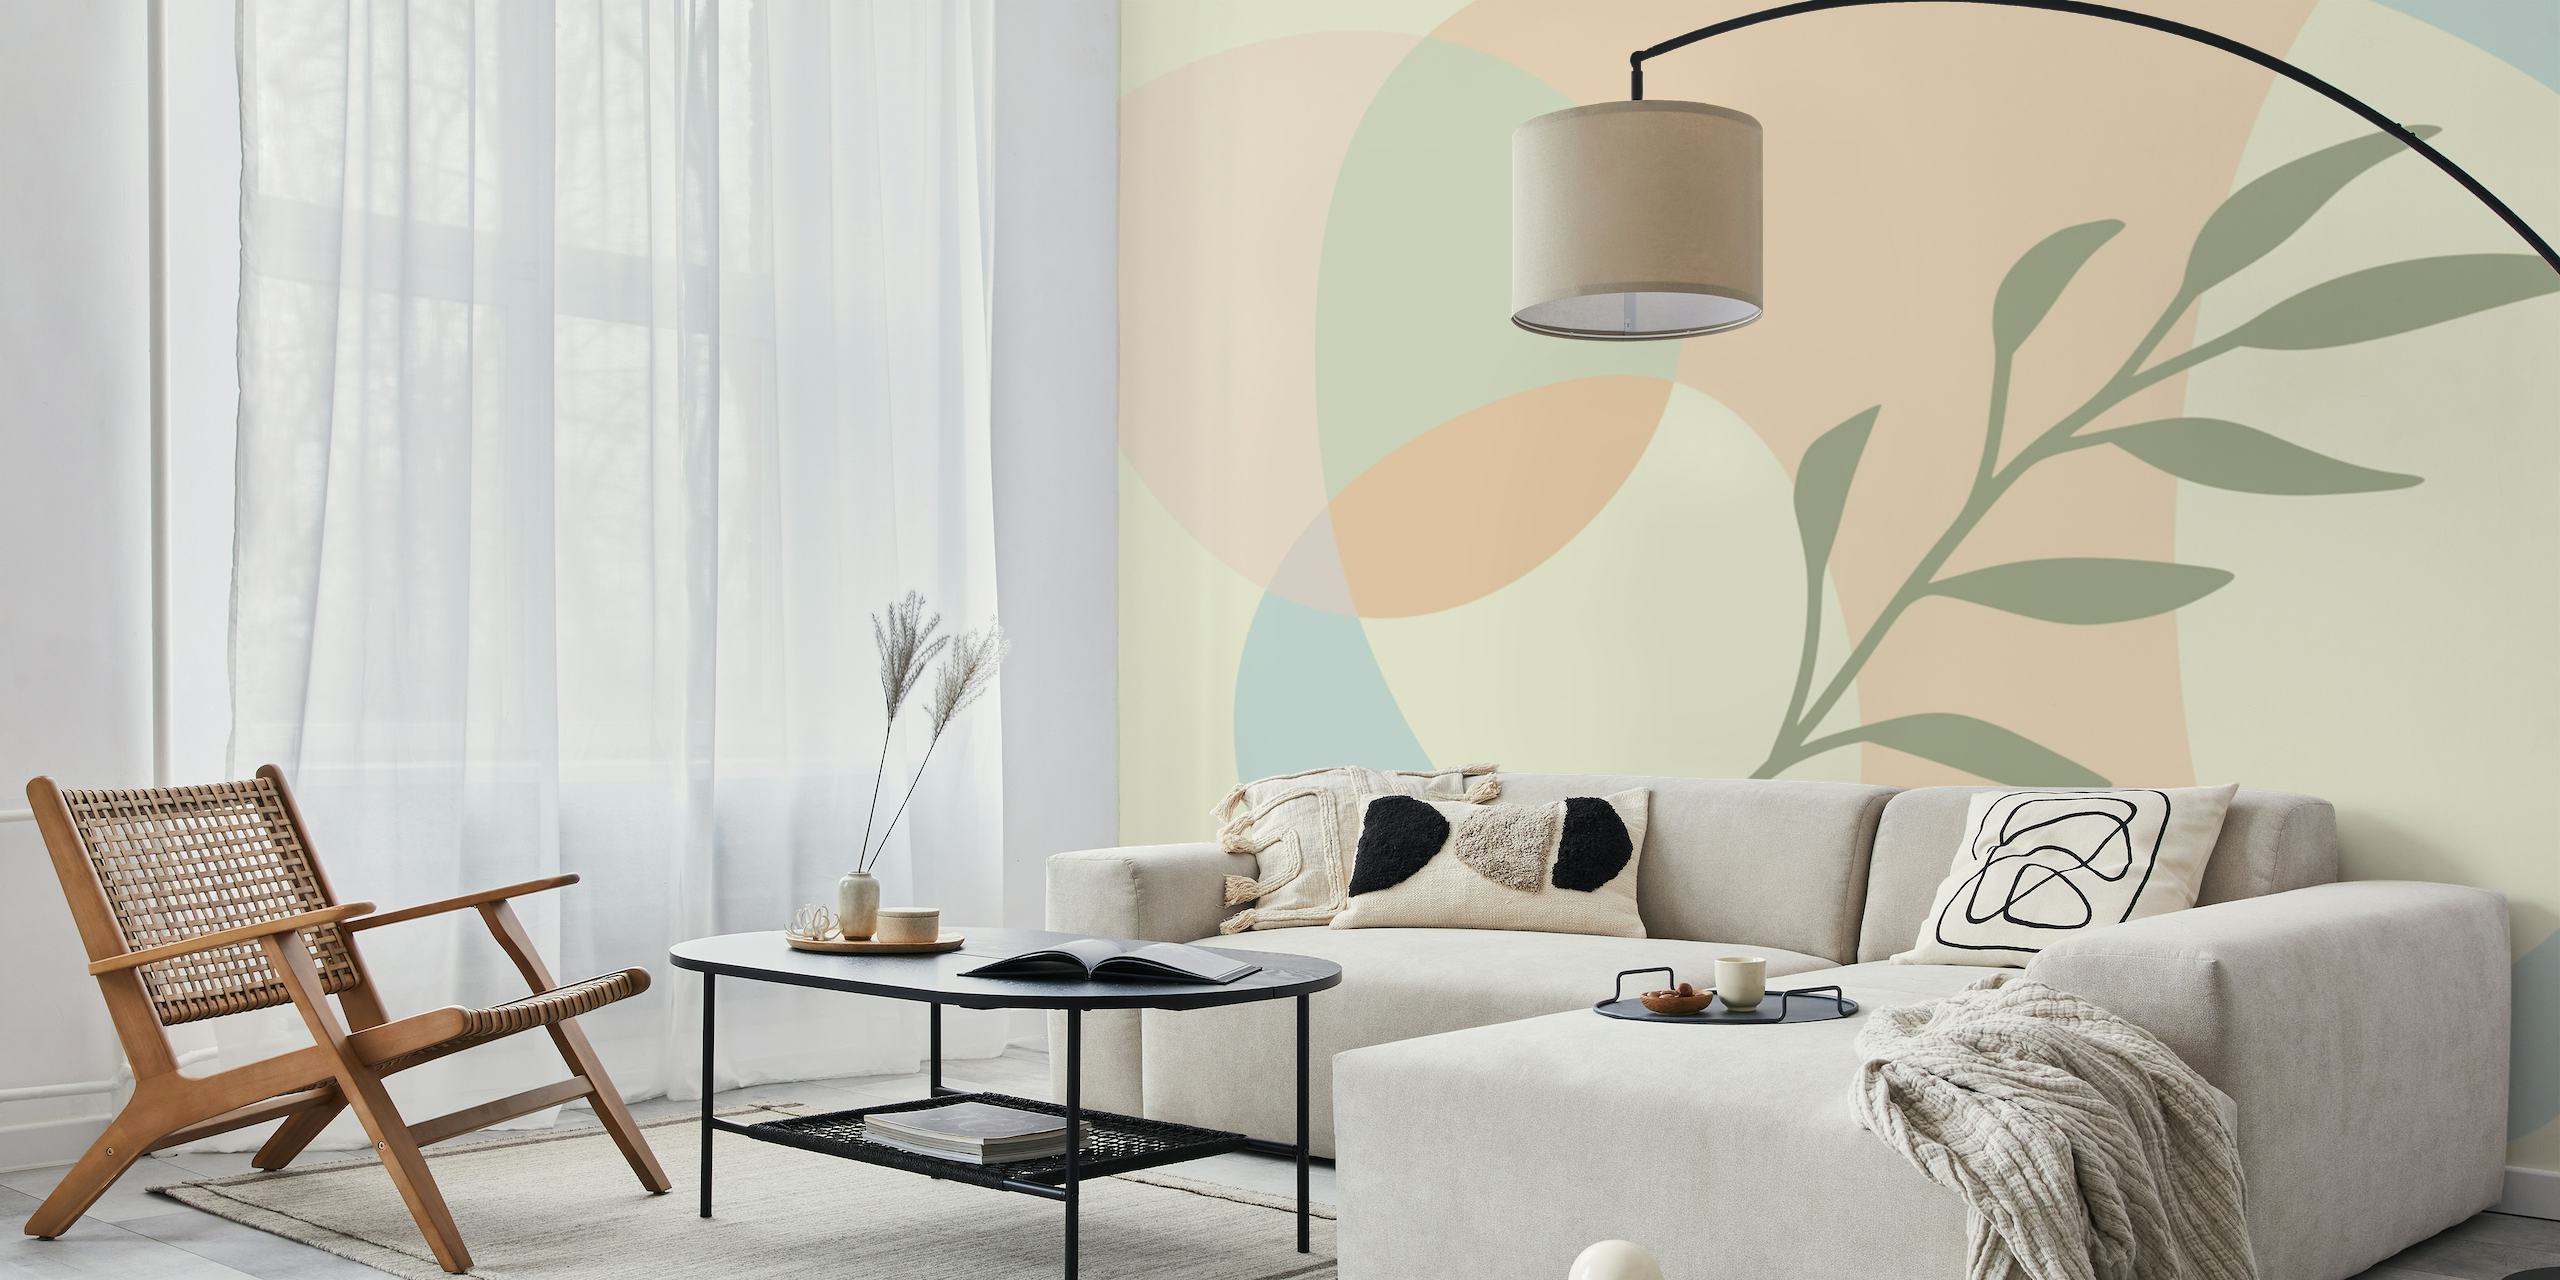 Minimalist bohemian style wall mural with pastel tones and leaf design